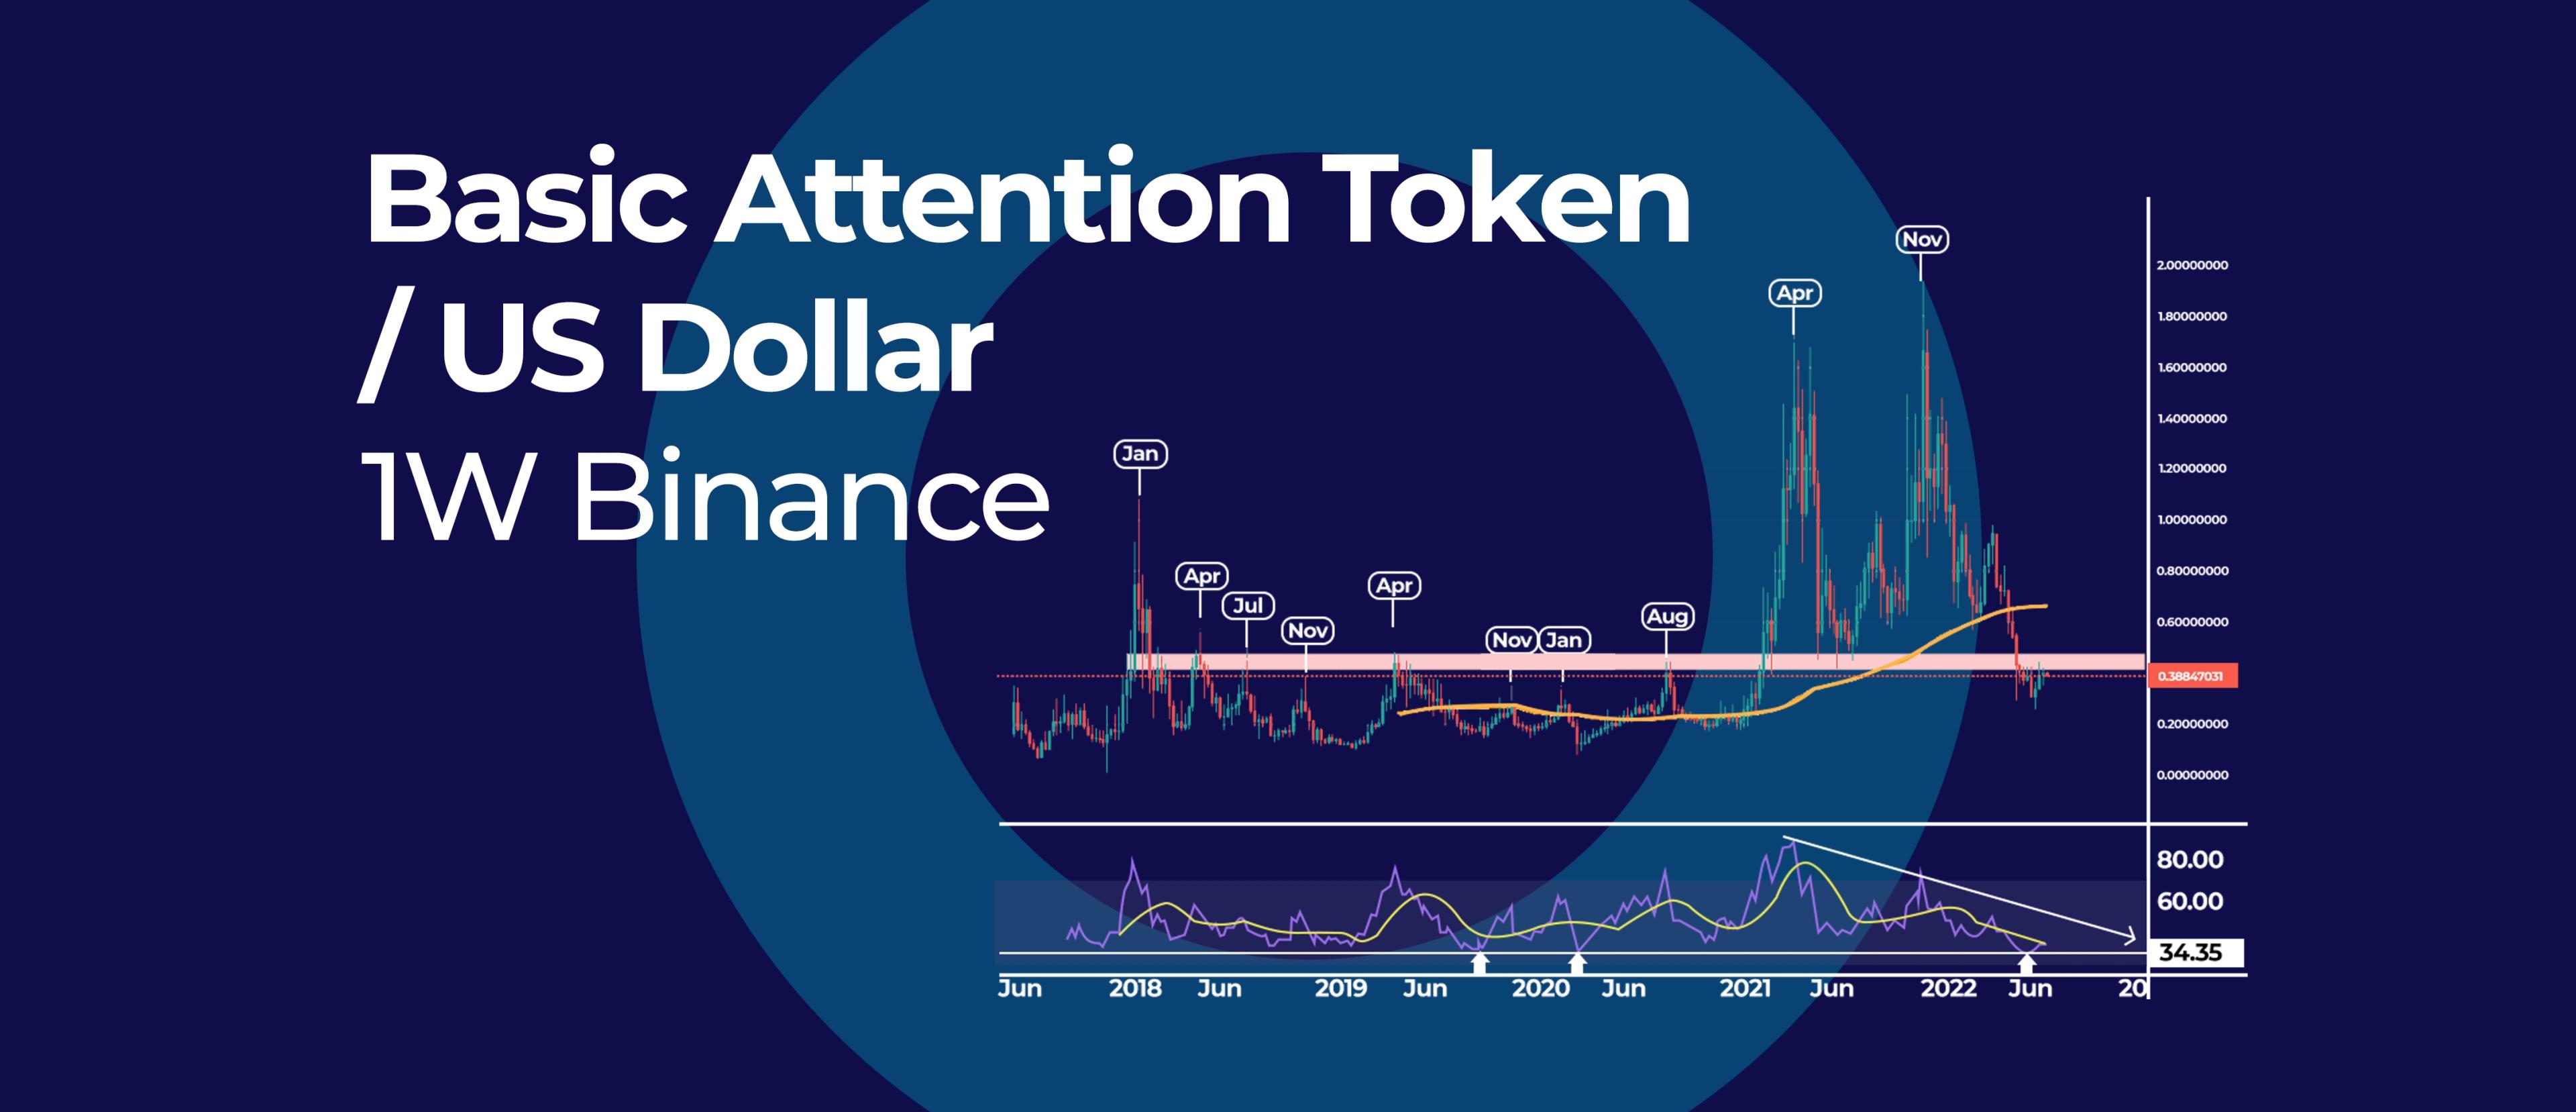 Basic Attention Token is Entering a Strong Seasonal Phase